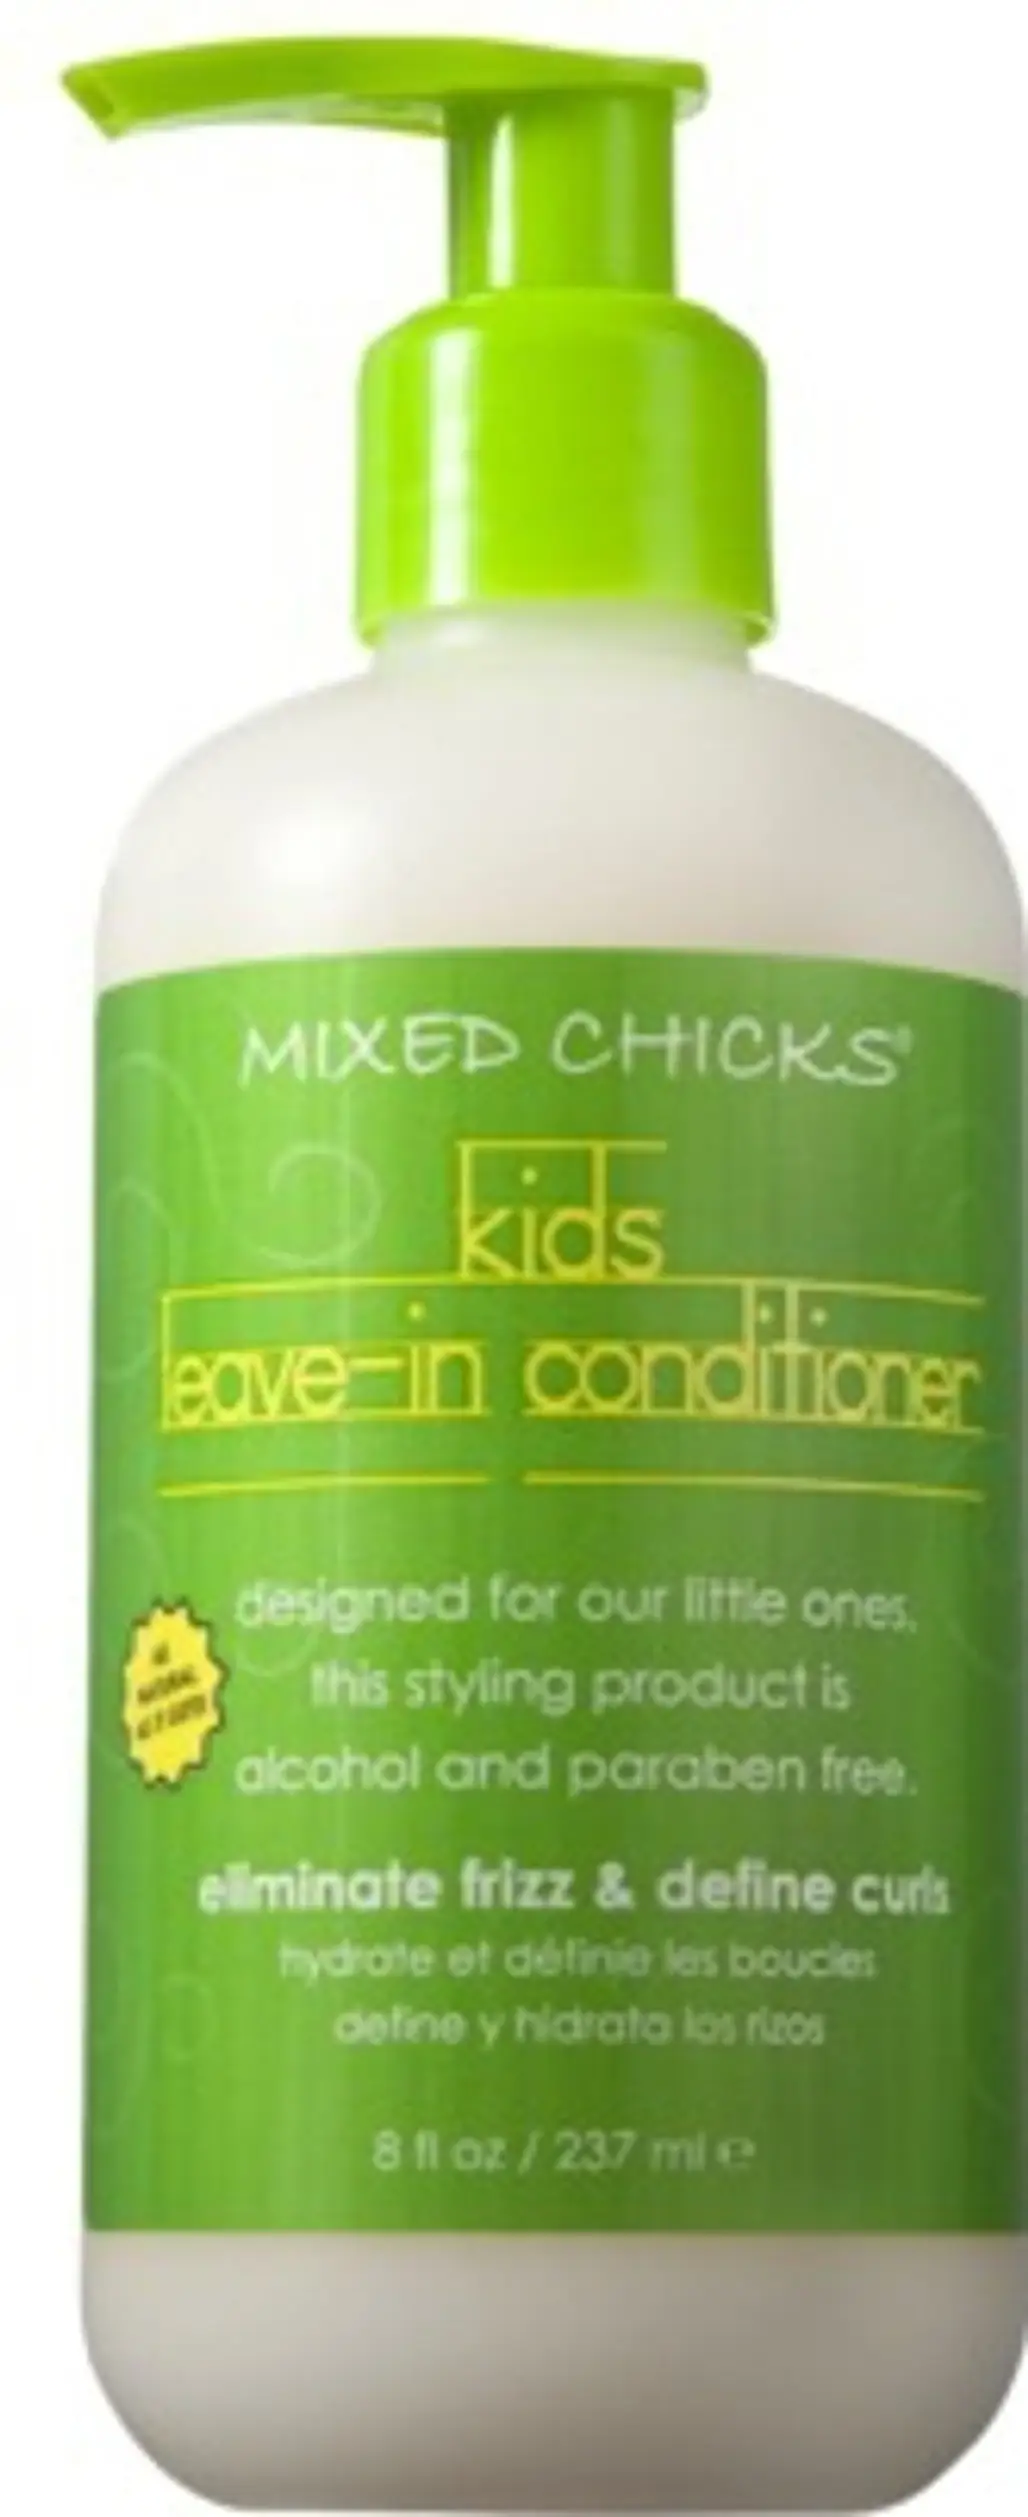 MIXED CHICKS Kids Leave-in Conditioner